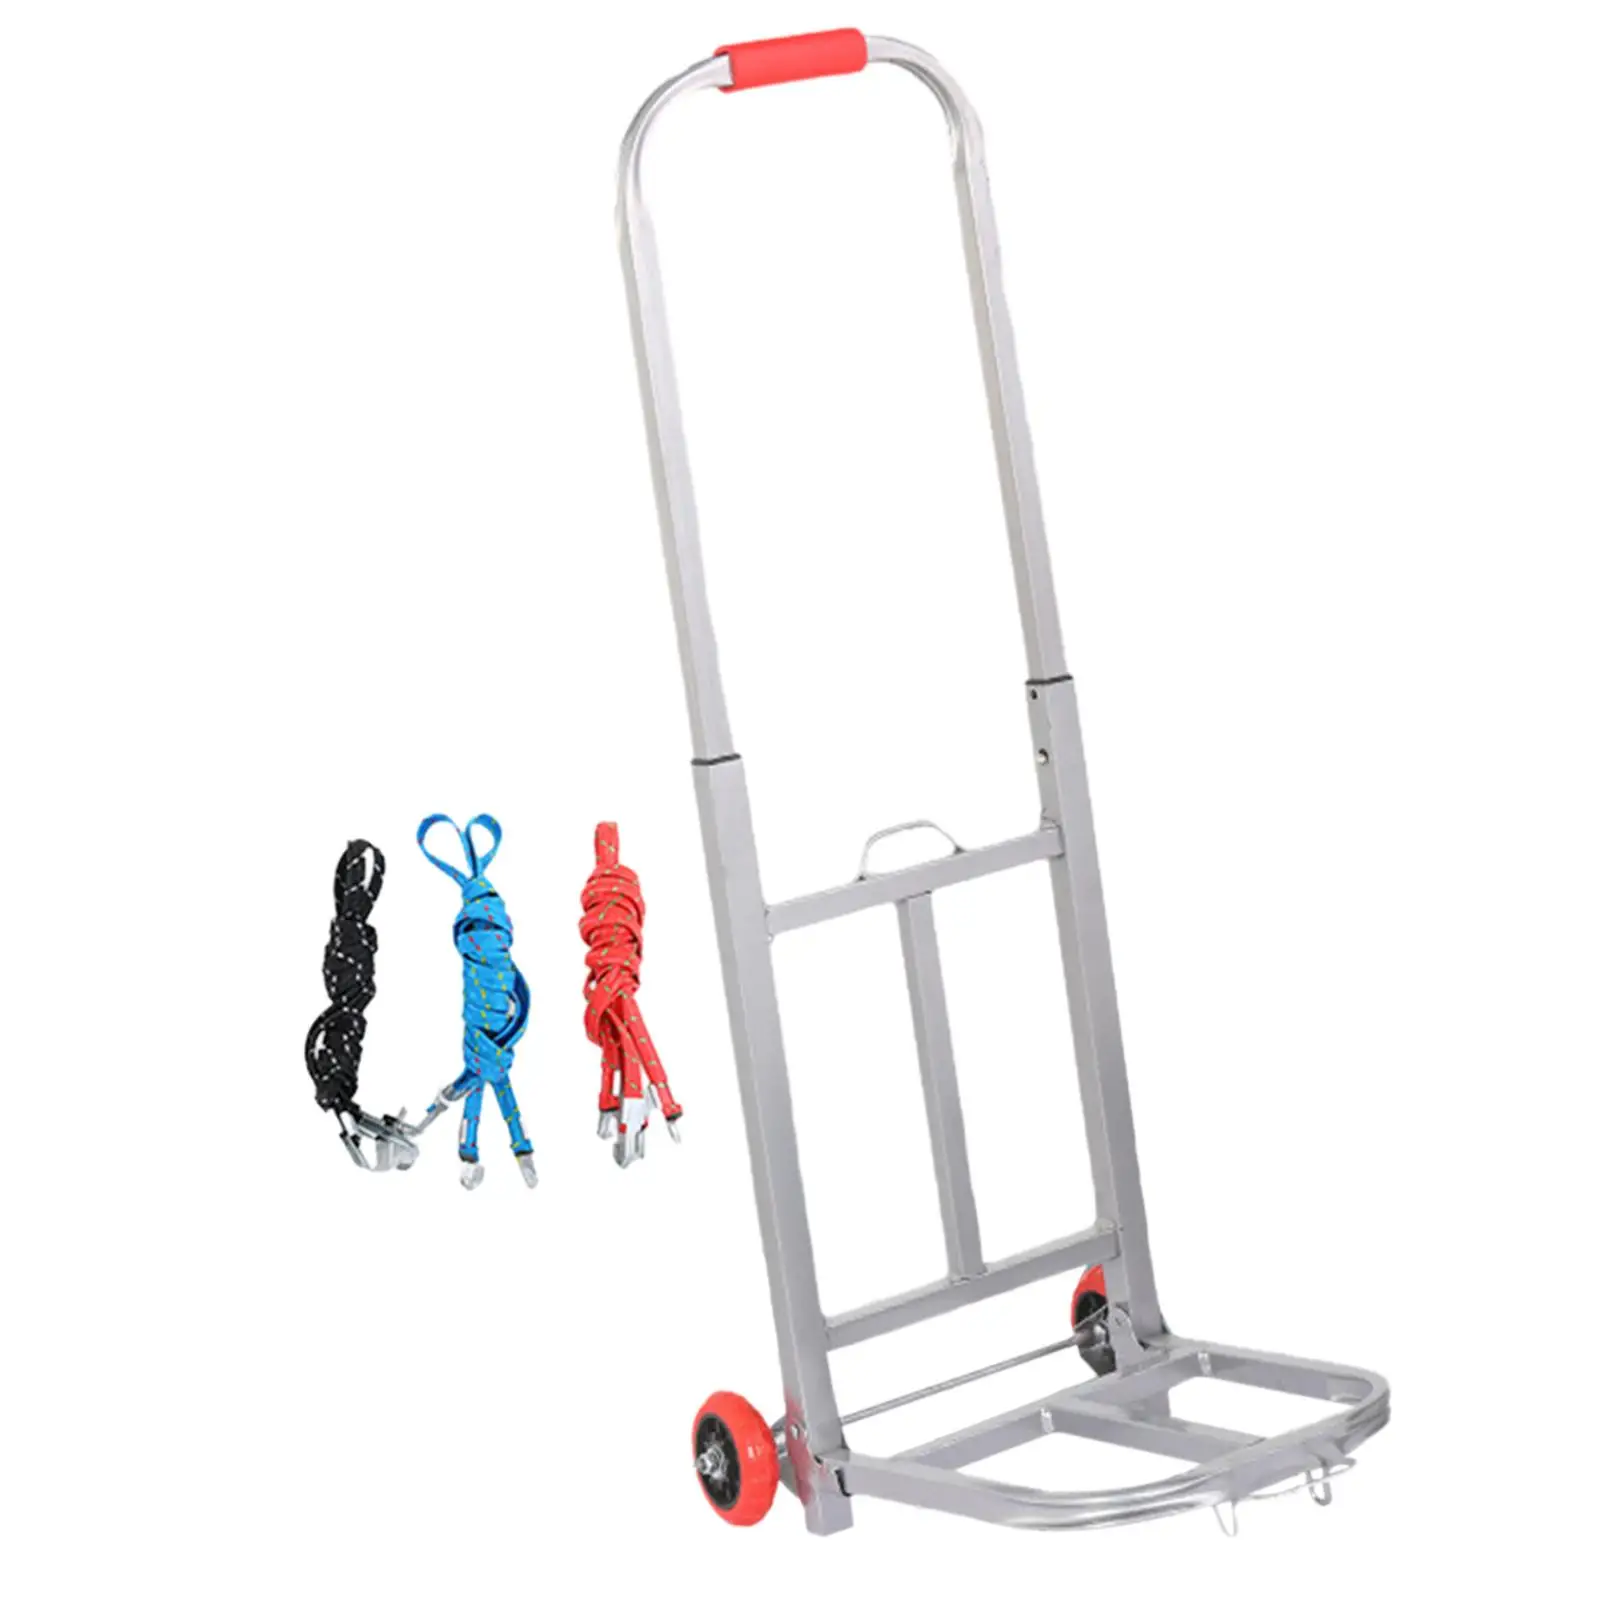 Foldable Folding Hand Truck Luggage Handcart Metal Frame Easily Transport and Storage Sturdy Telescoping Handle for Daily Use